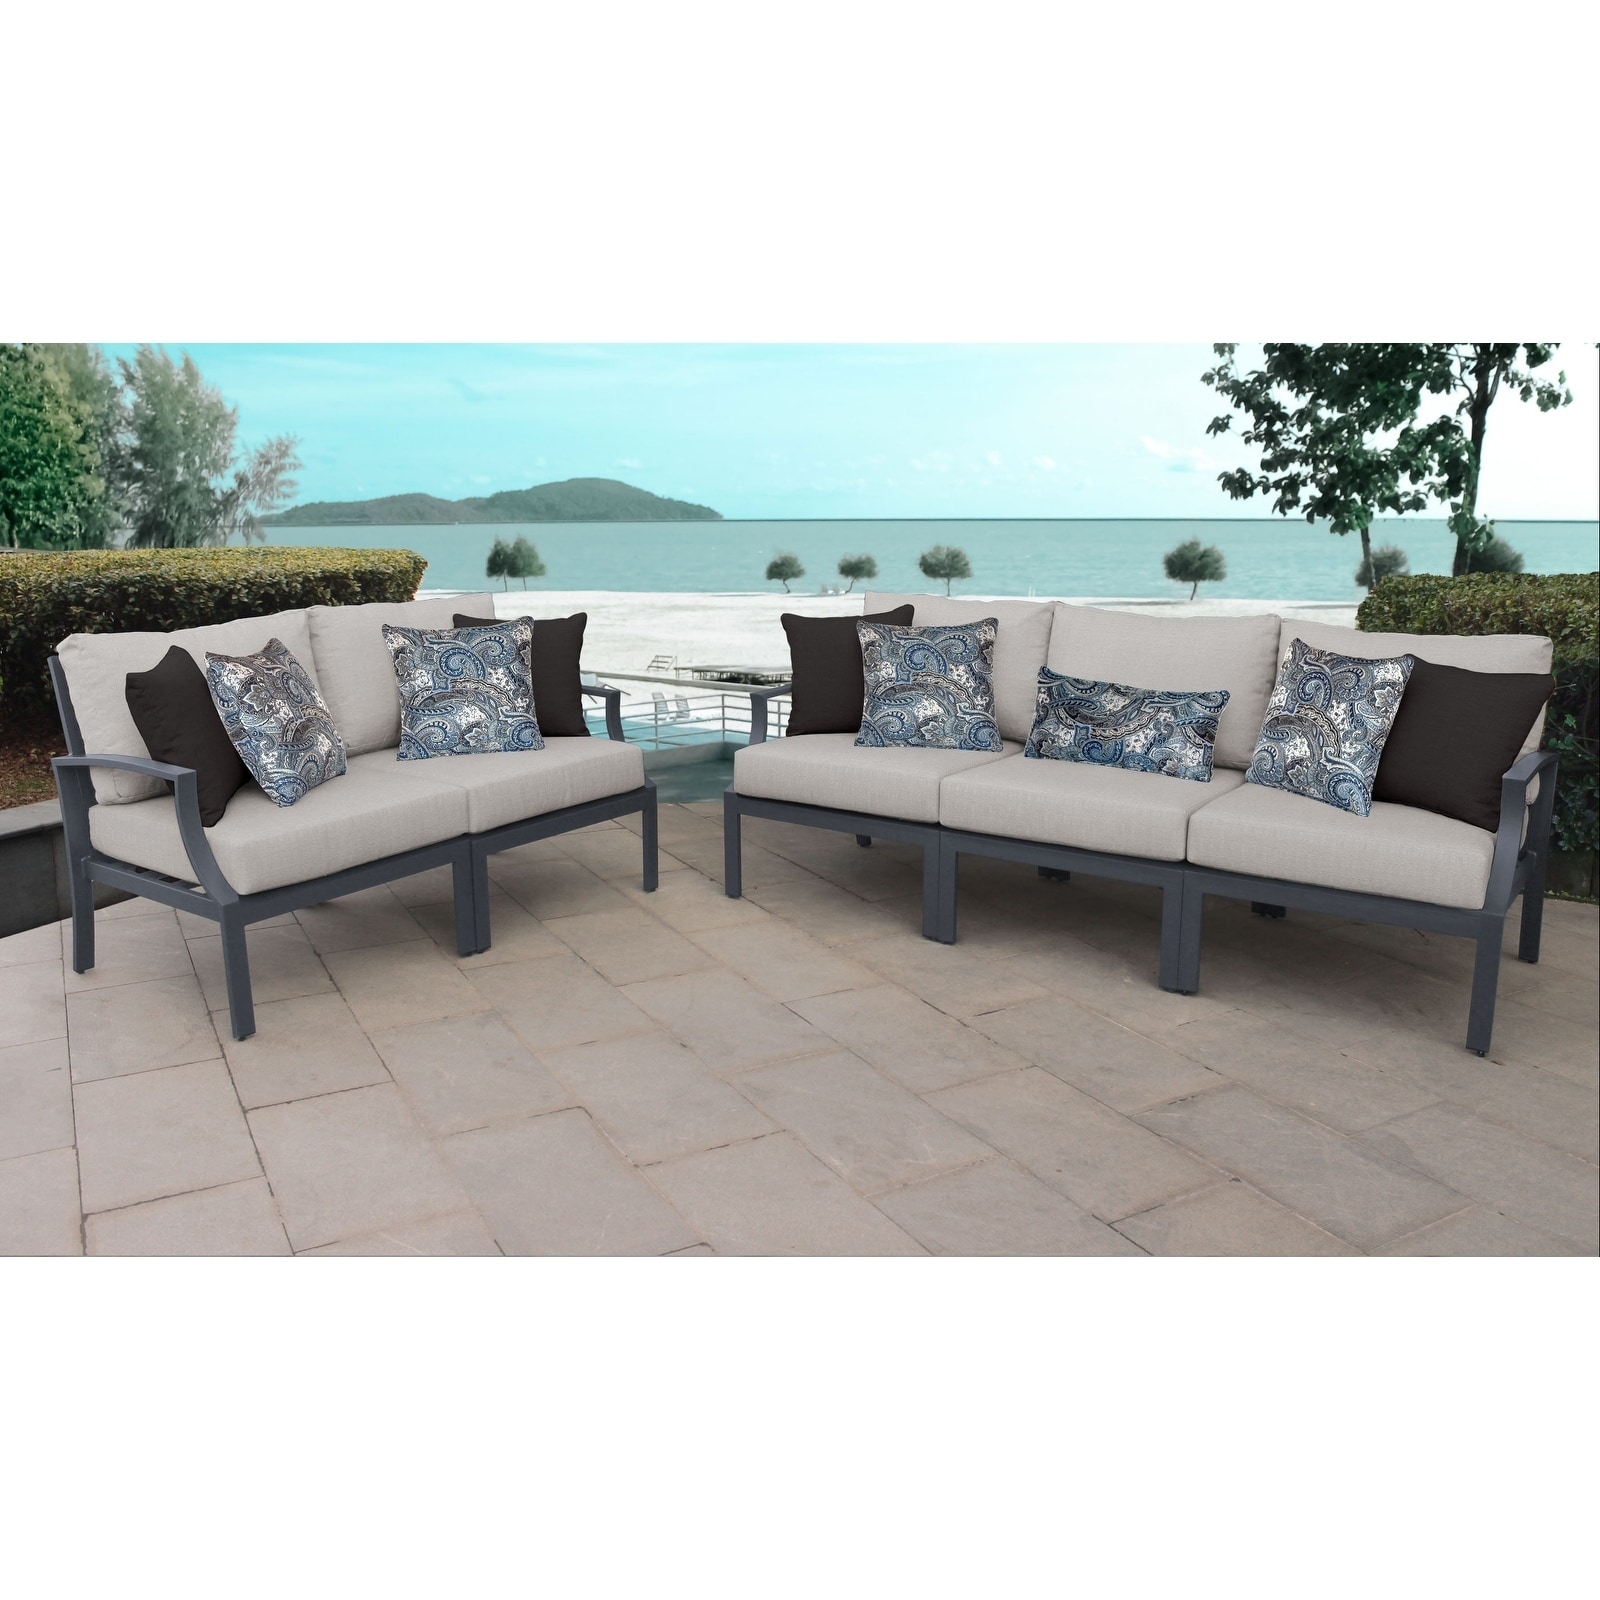 Moresby 5-piece Outdoor Aluminum Patio Furniture Set 05a By Havenside Home